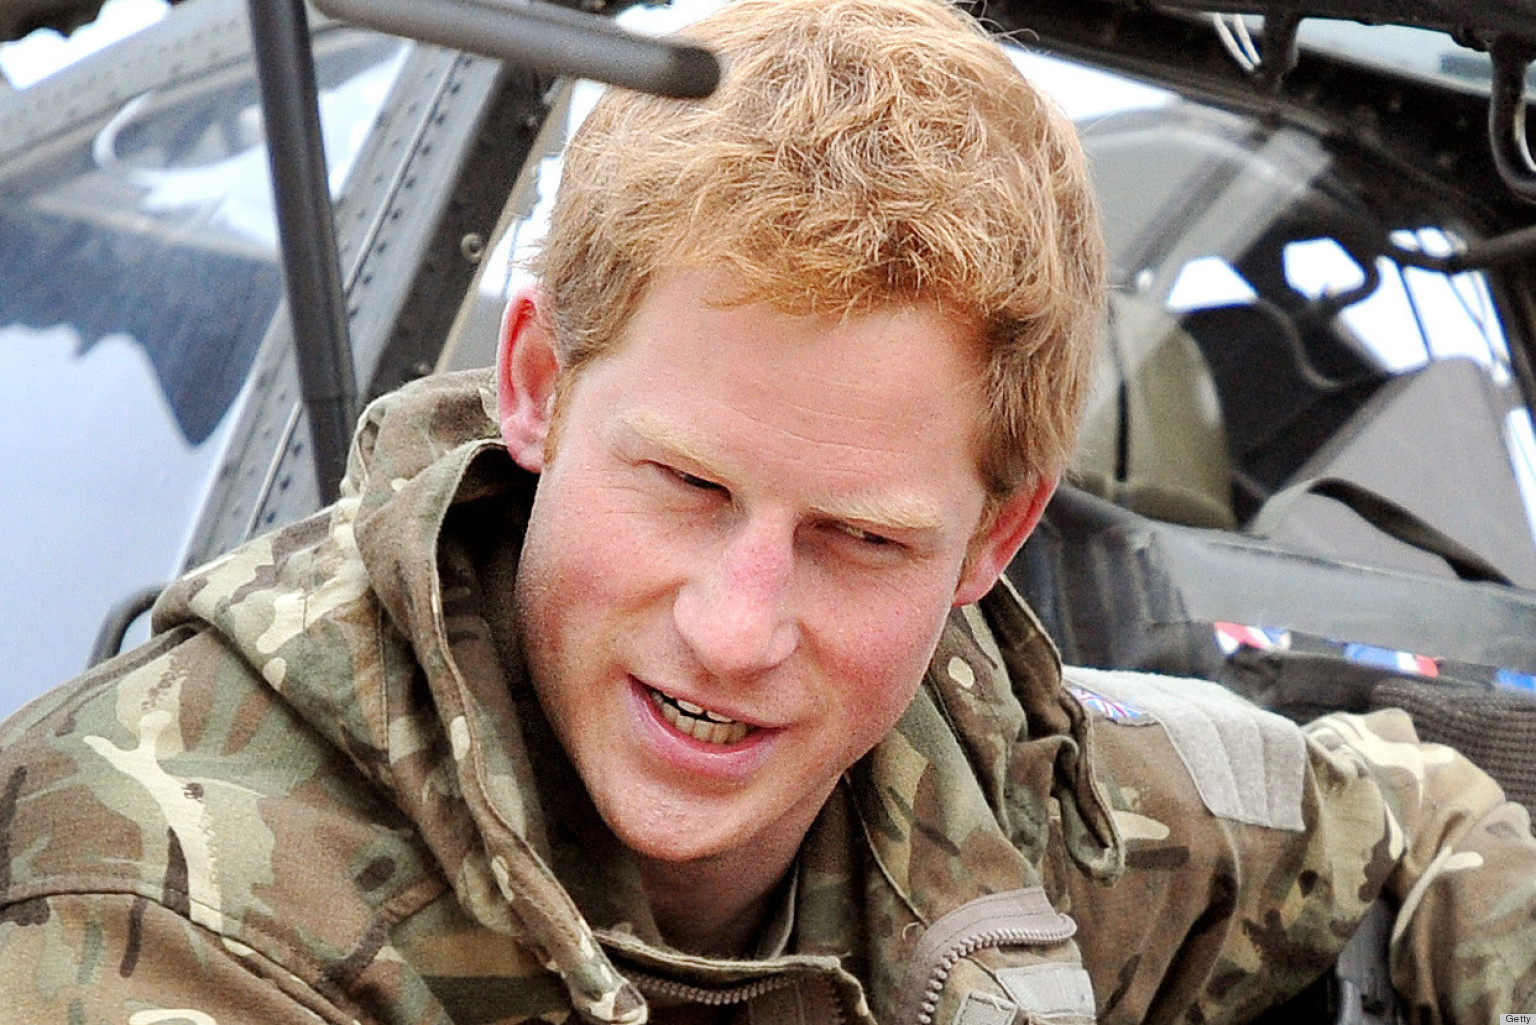 Prince Harry: Nude Photos Let My Family Down 